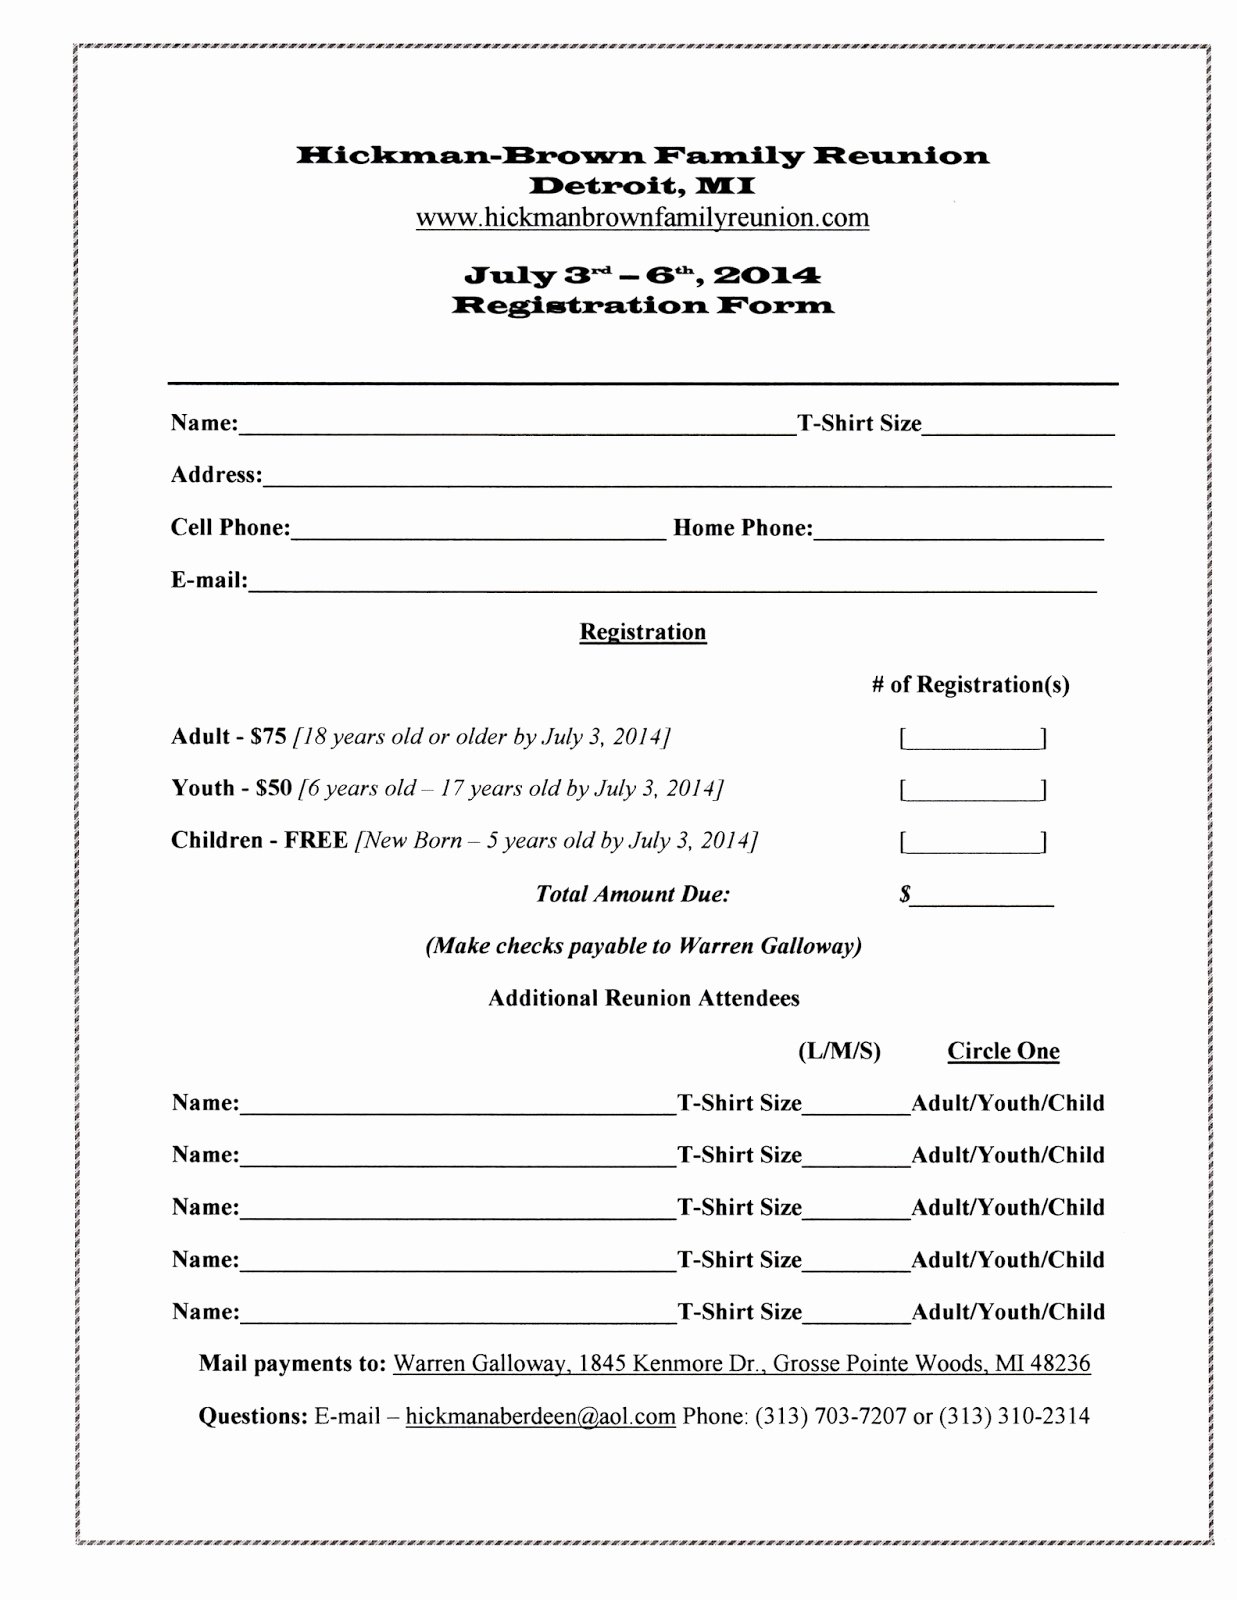 Printable Registration form Template Luxury Hickmanbrown Family Blog